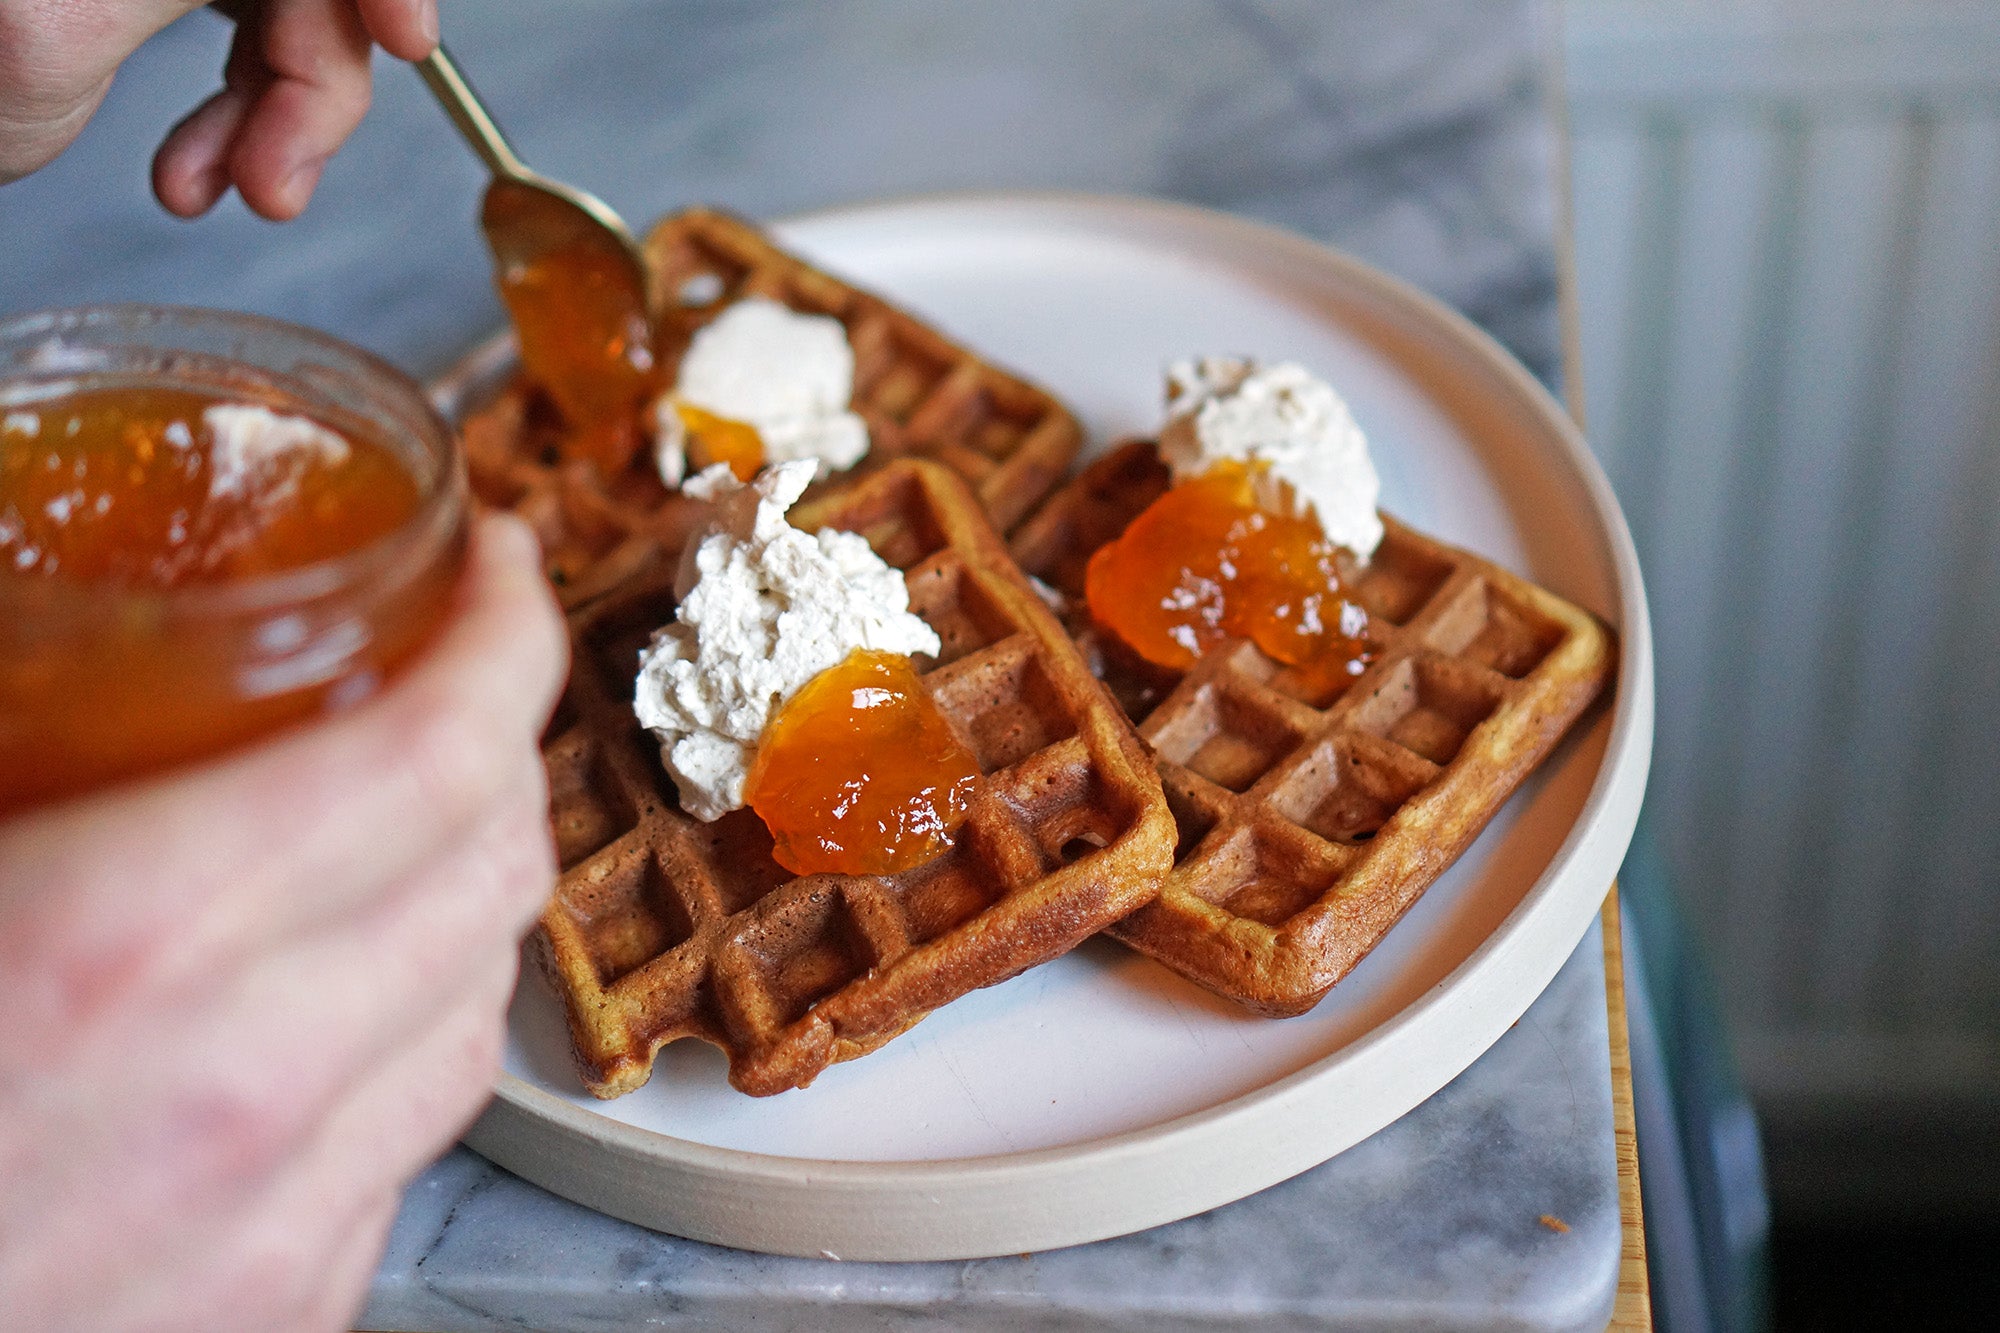 Delicious Homemade Waffle Recipe by Curtis Stone